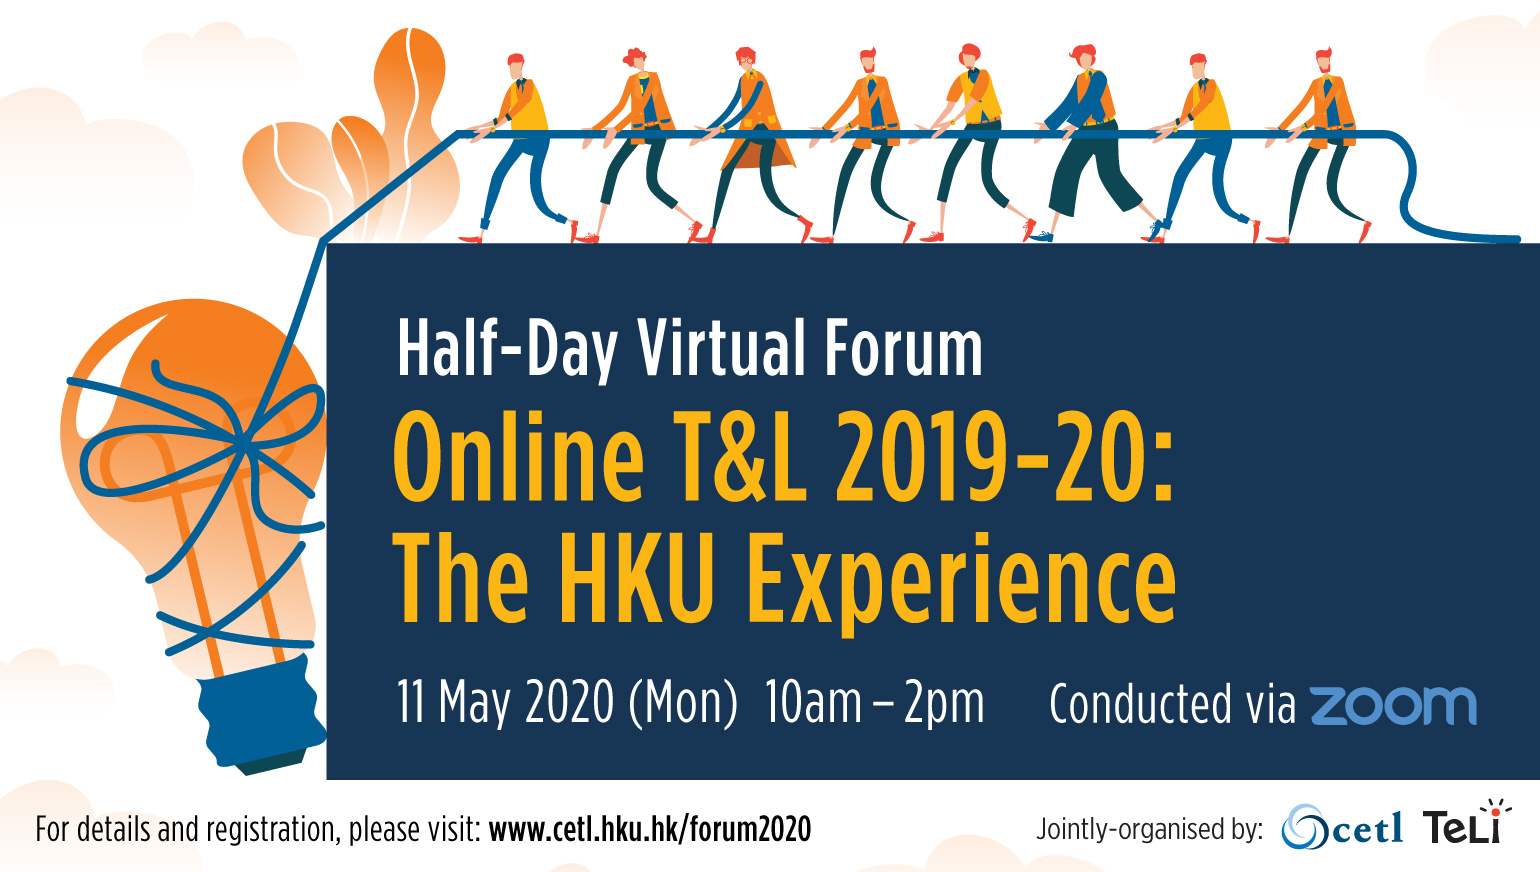 Half-Day Virtual Forum Online T&L 2019-20: The HKU Experience